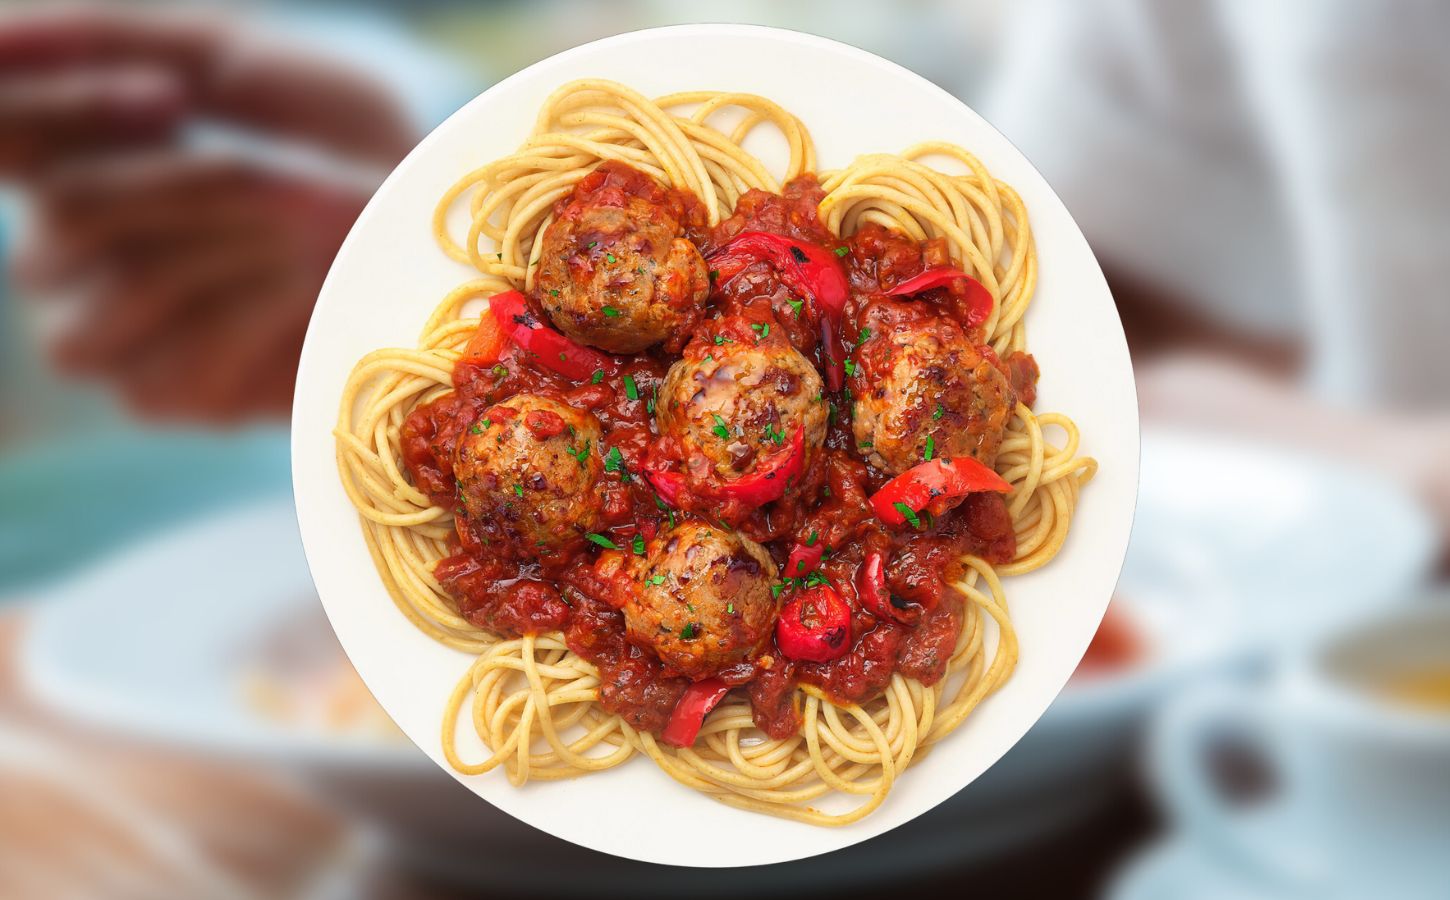 A plate of vegan spaghetti and meatballs from a THIS plant-based ready meal